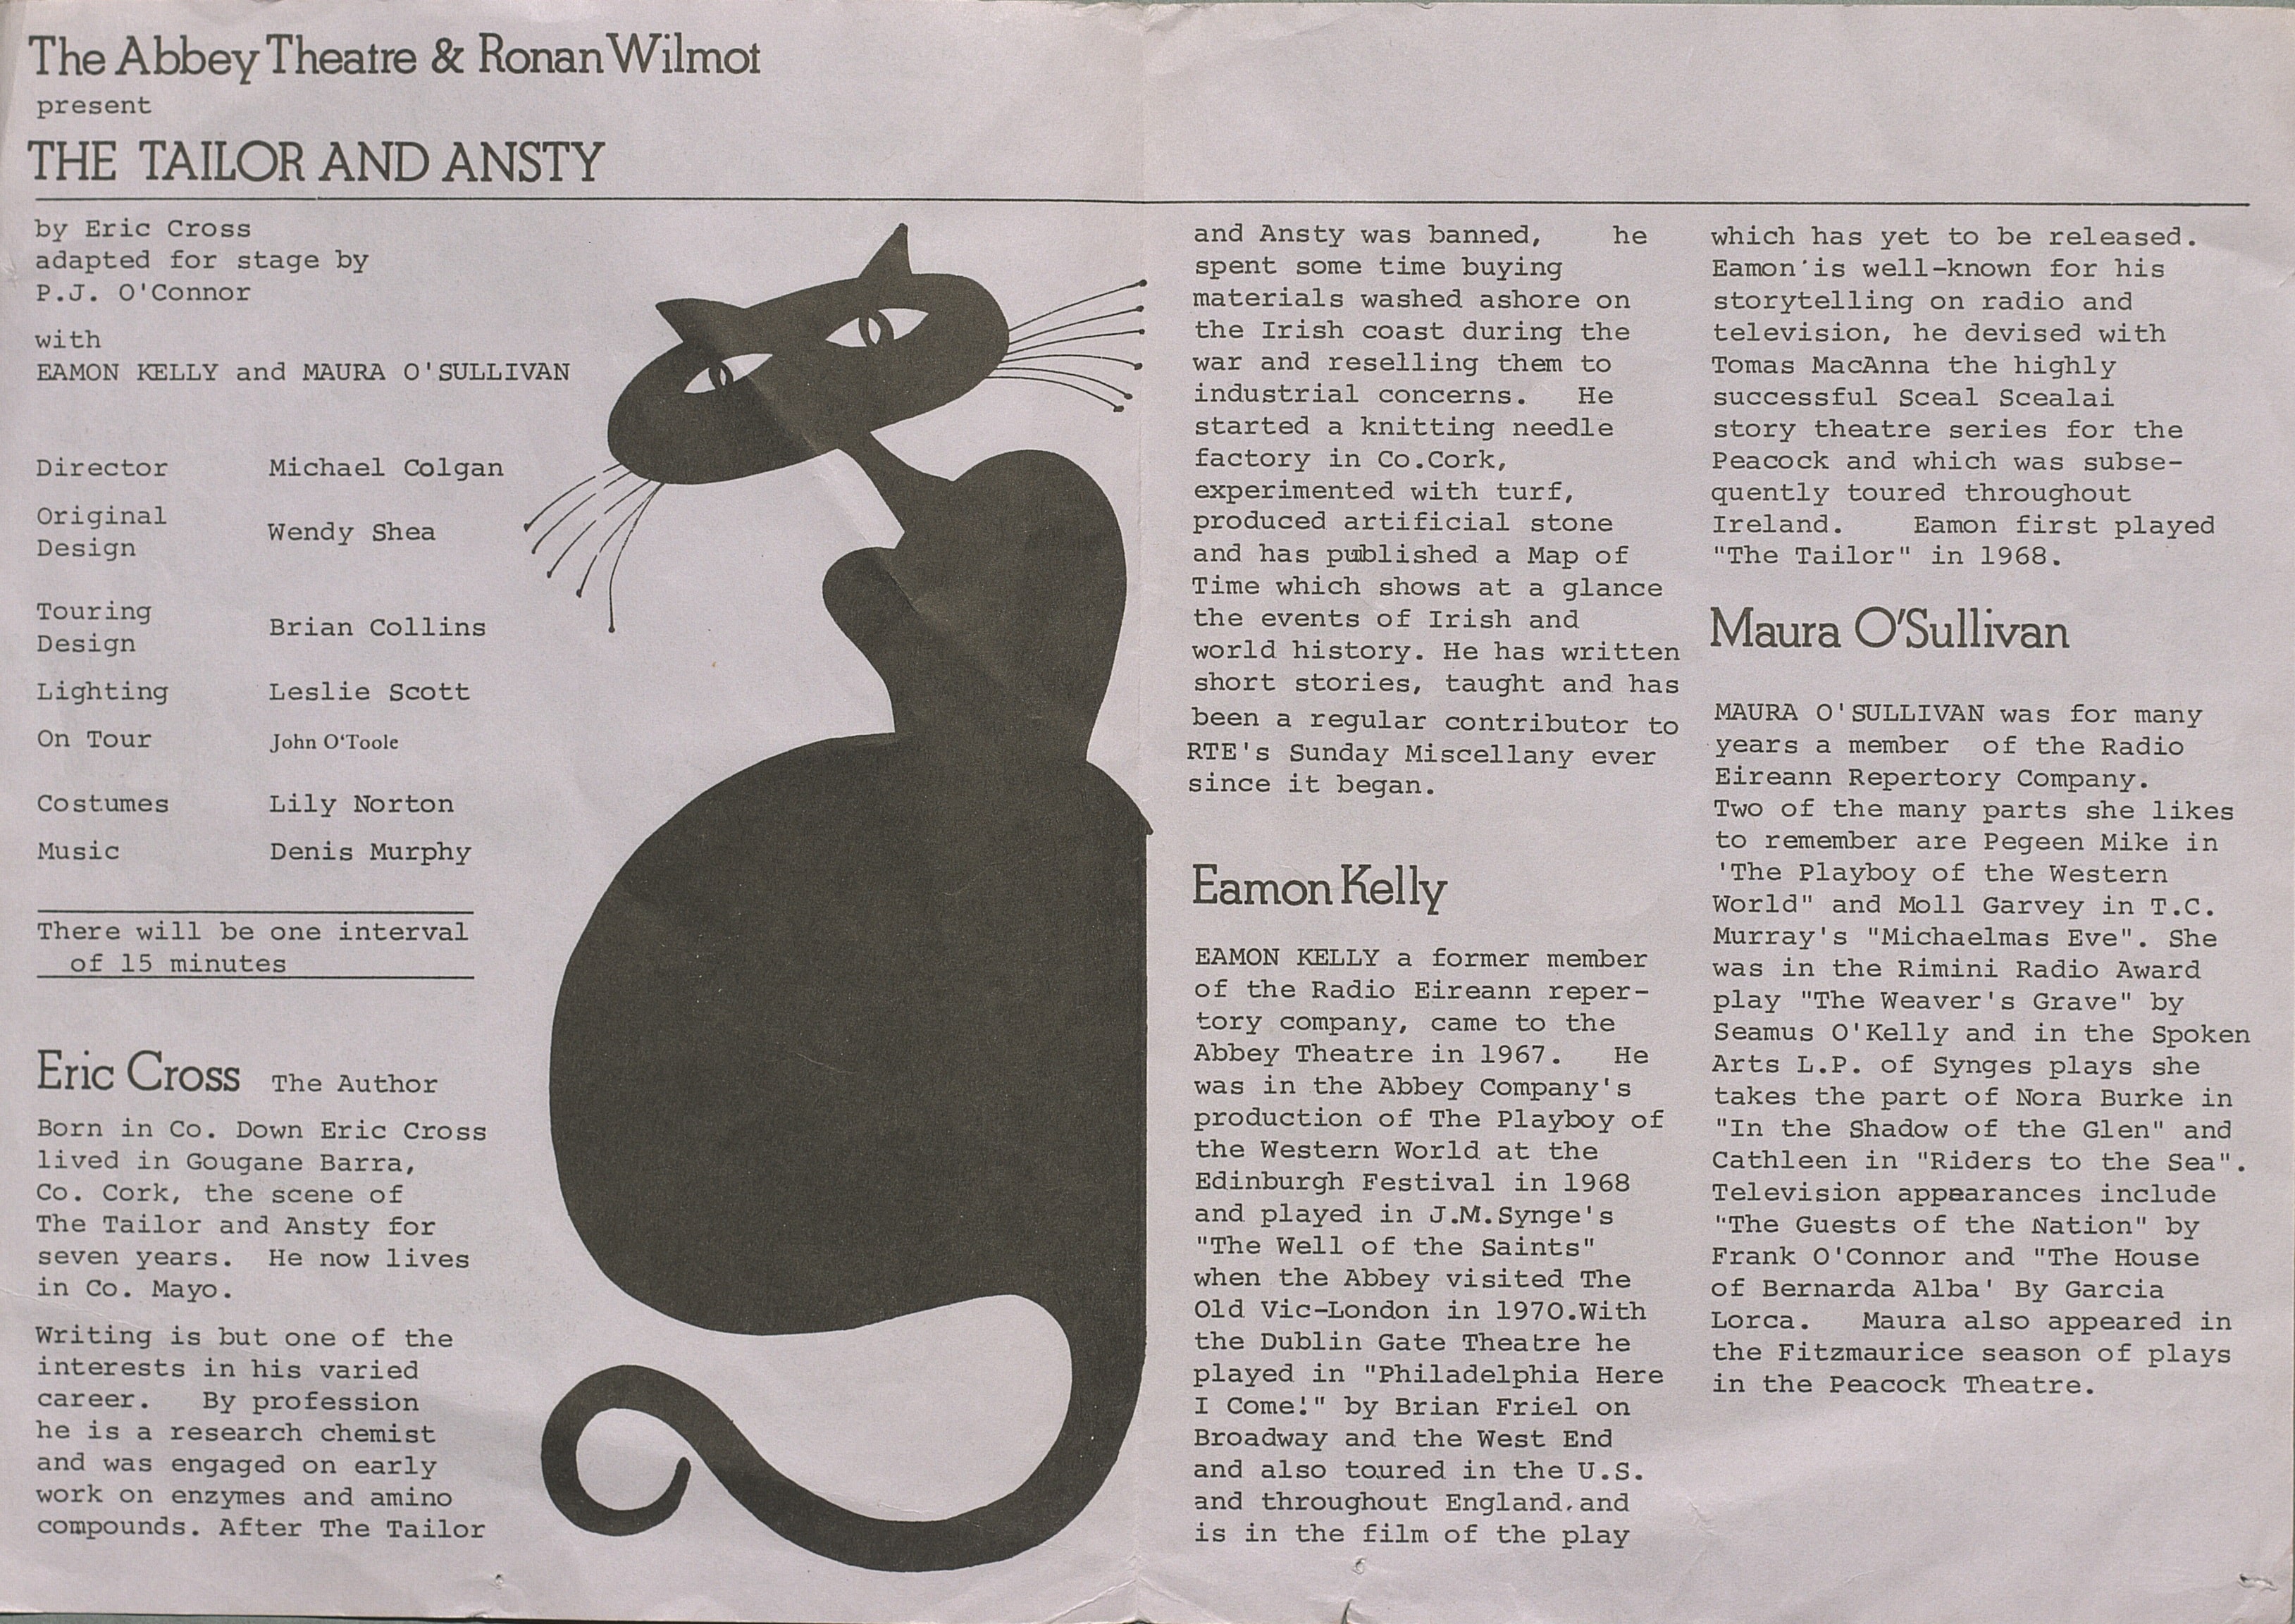 Programme to the stage production of The Tailor and Ansty. There are biographies of Eric Cross, Eamon Kelly and Maura O'Sullivan. There is a picture of a black cat on the programme.